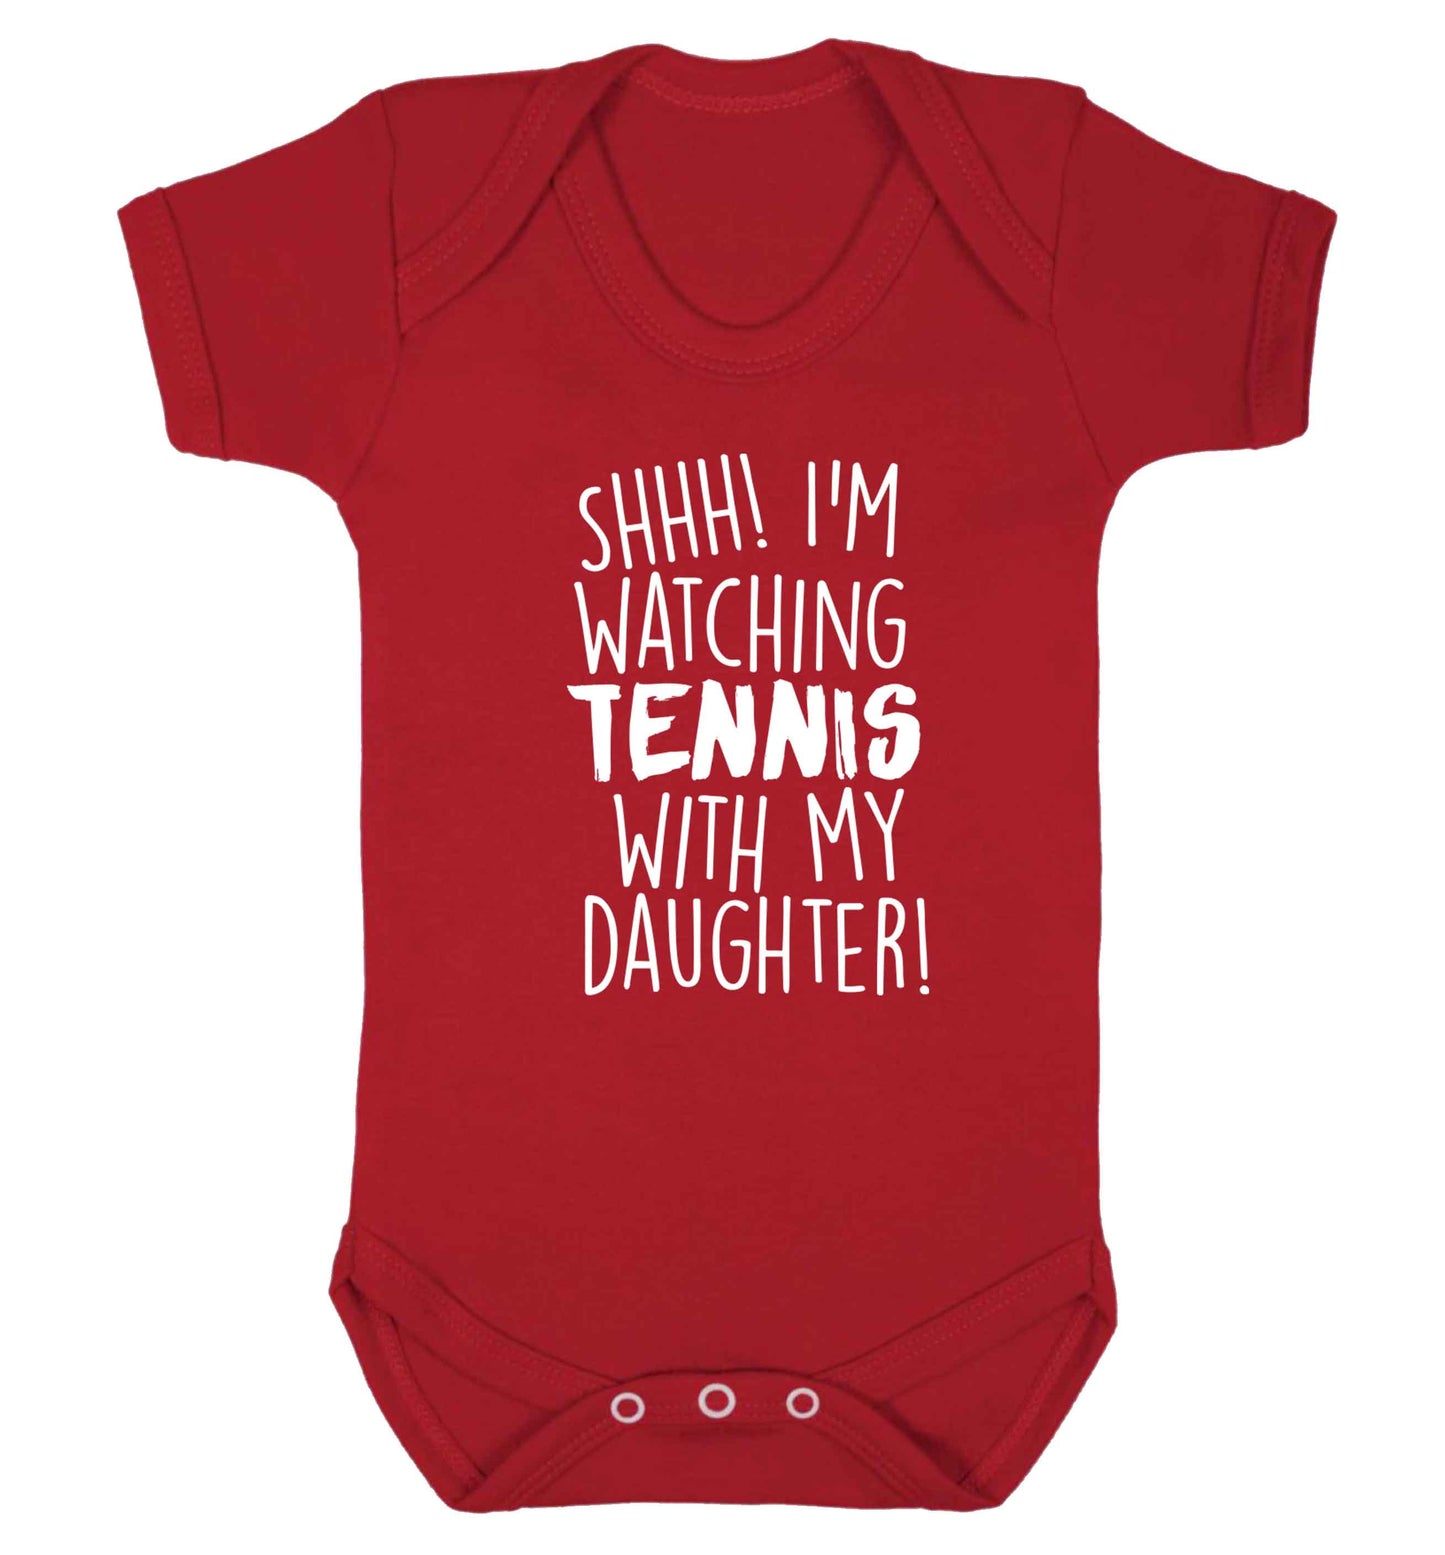 Shh! I'm watching tennis with my daughter! Baby Vest red 18-24 months